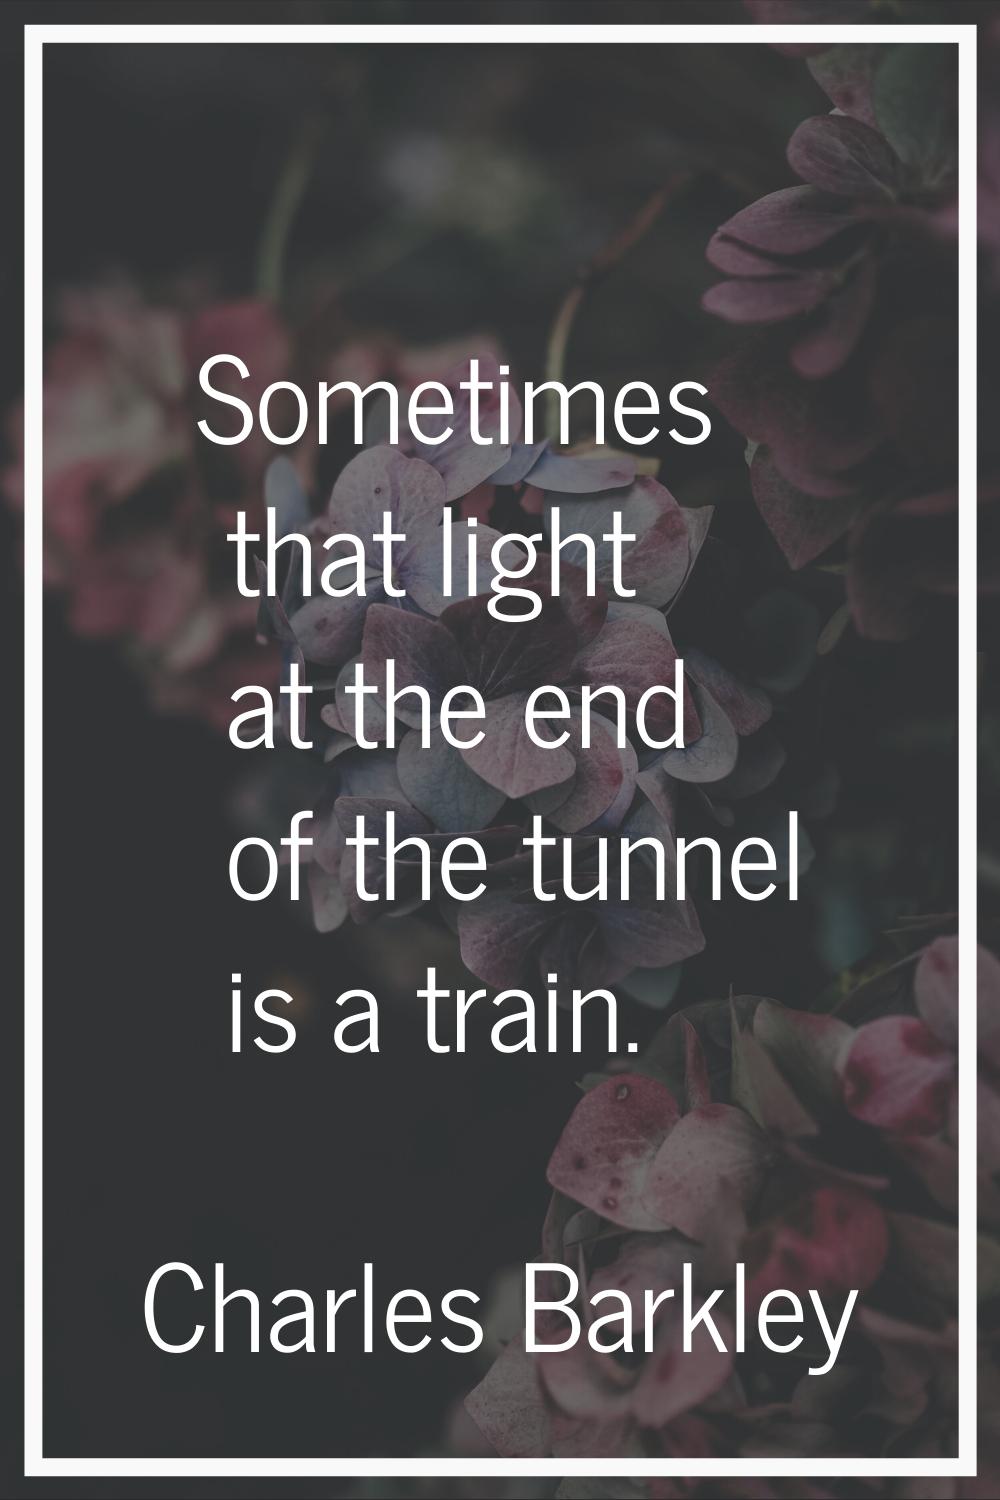 Sometimes that light at the end of the tunnel is a train.